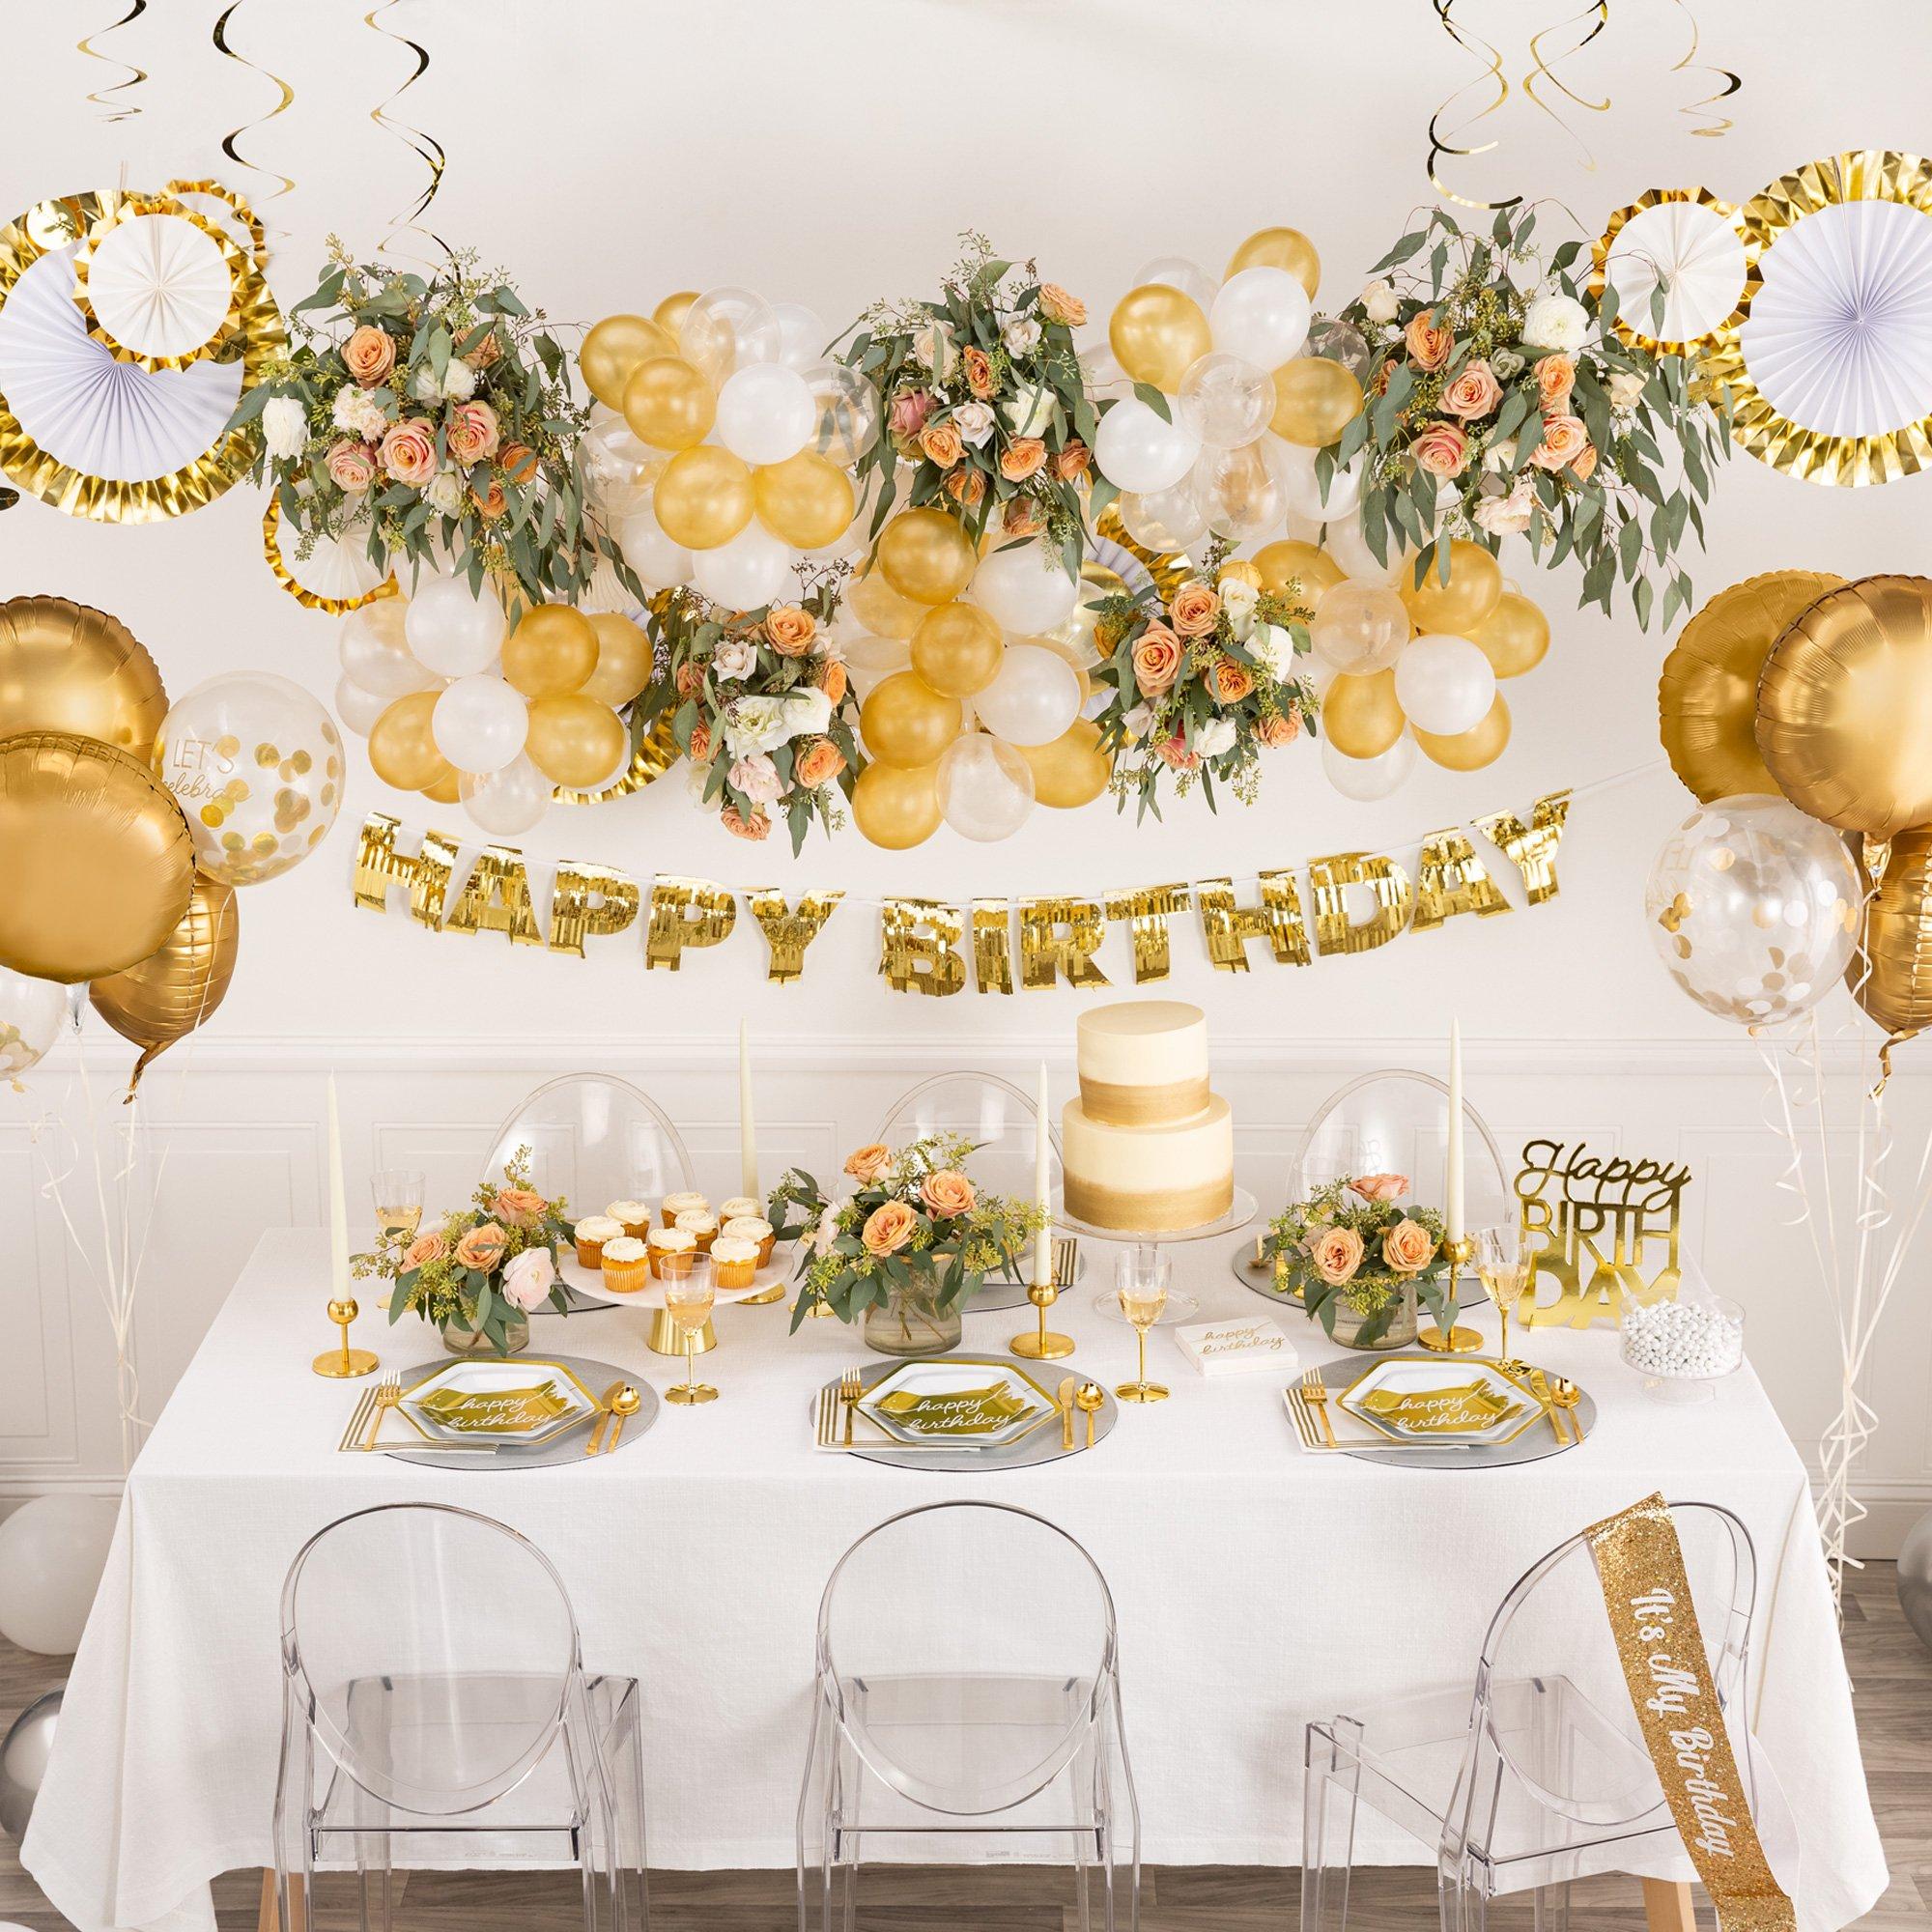 80th Birthday Party Supplies, Decorations & Ideas | Party City